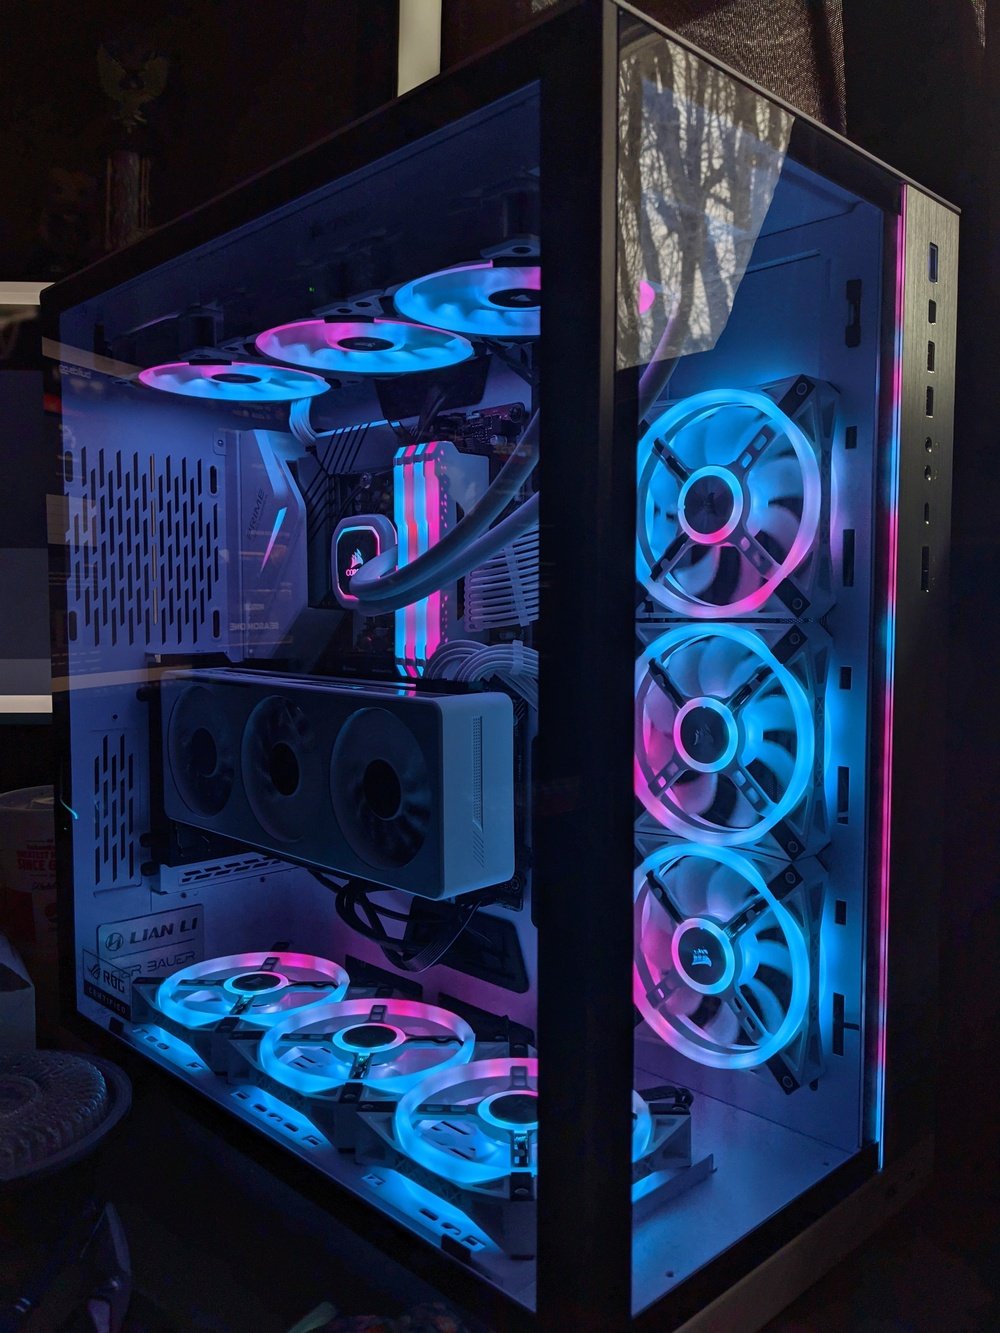 Corsair Commander PRO fan and lighting controller announced - Cooling -  News 